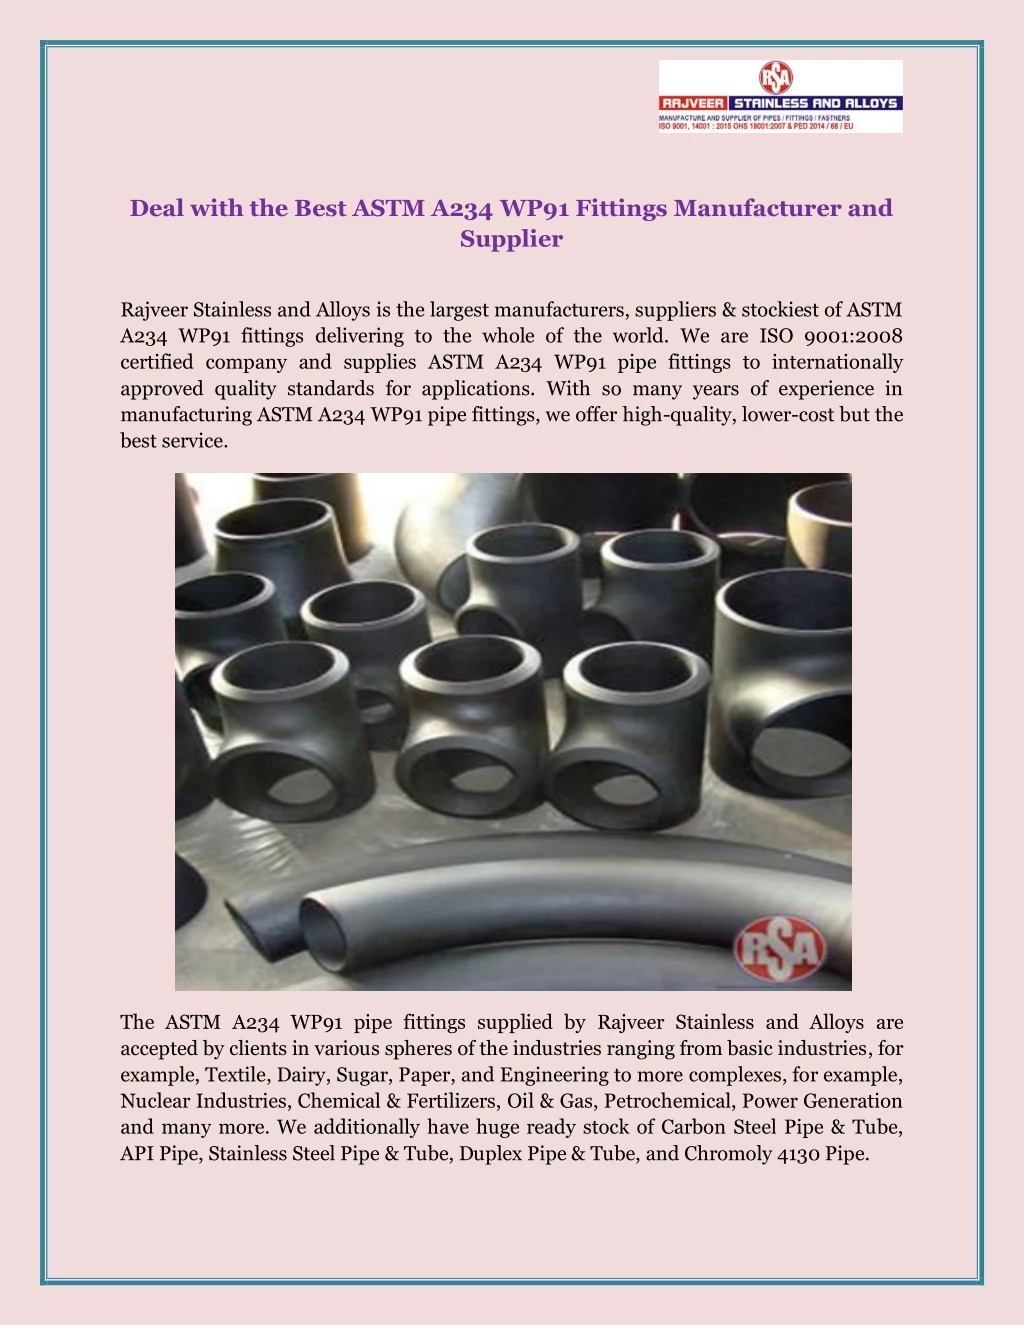 deal with the best astm a234 wp91 fittings